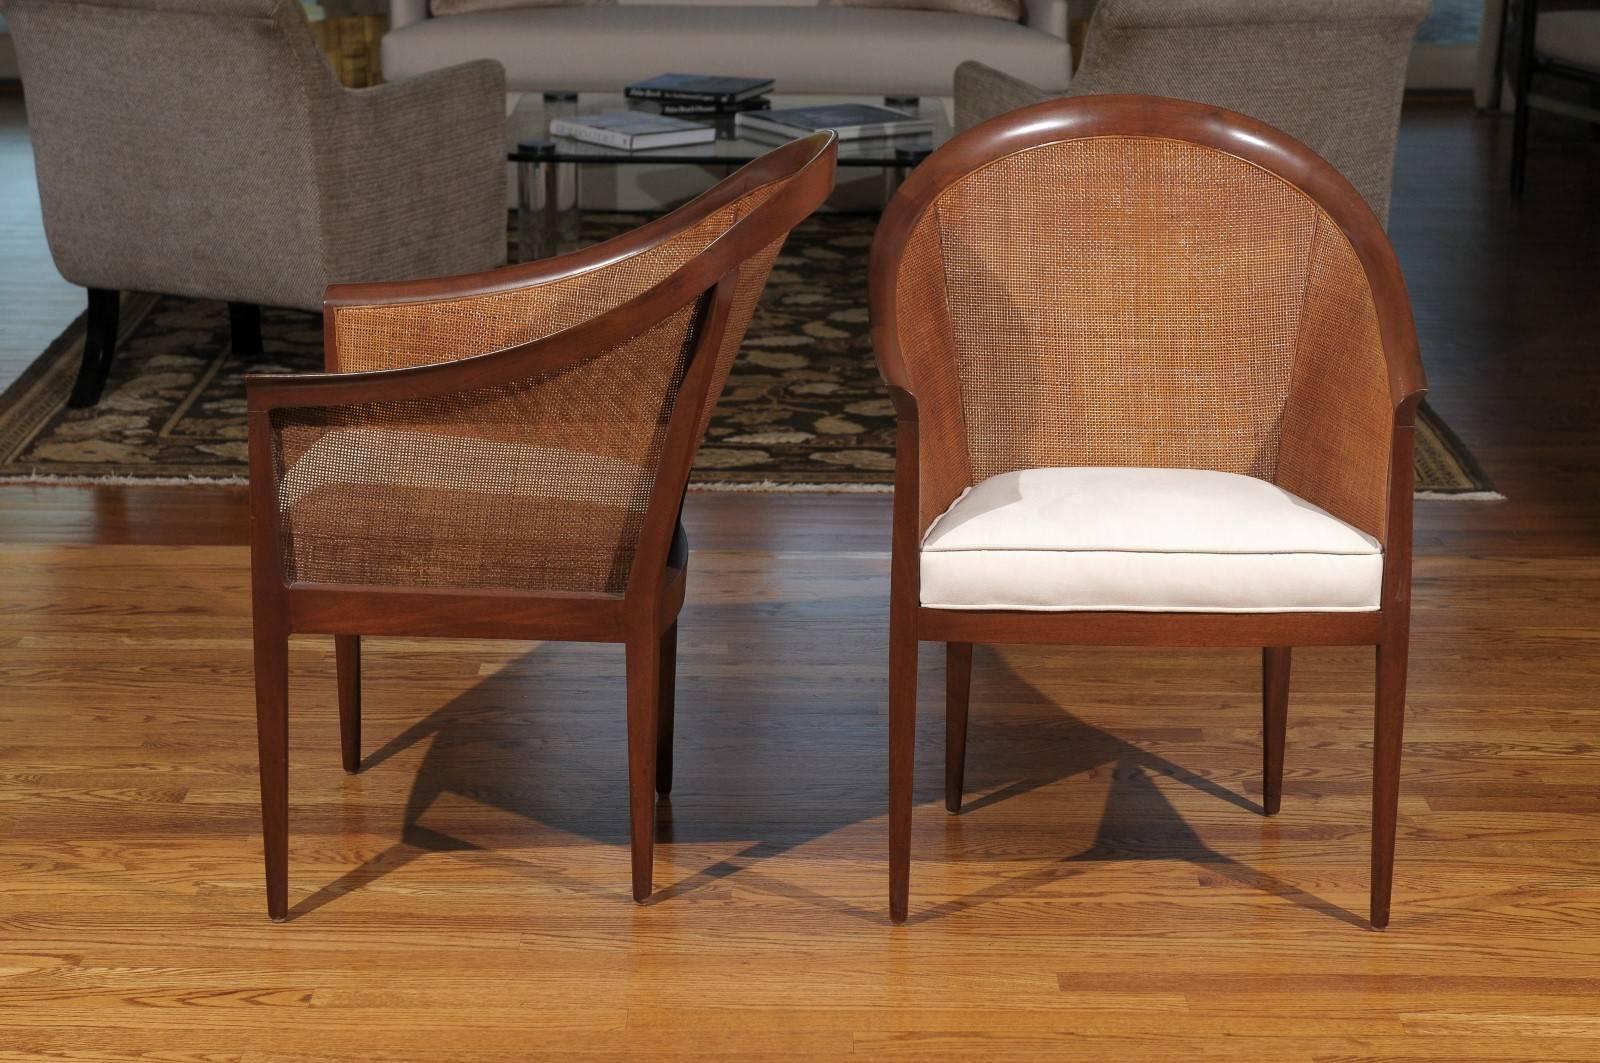 Elegant Restored Pair of Walnut Cane Chairs by Kipp Stewart for Directional In Excellent Condition For Sale In Atlanta, GA